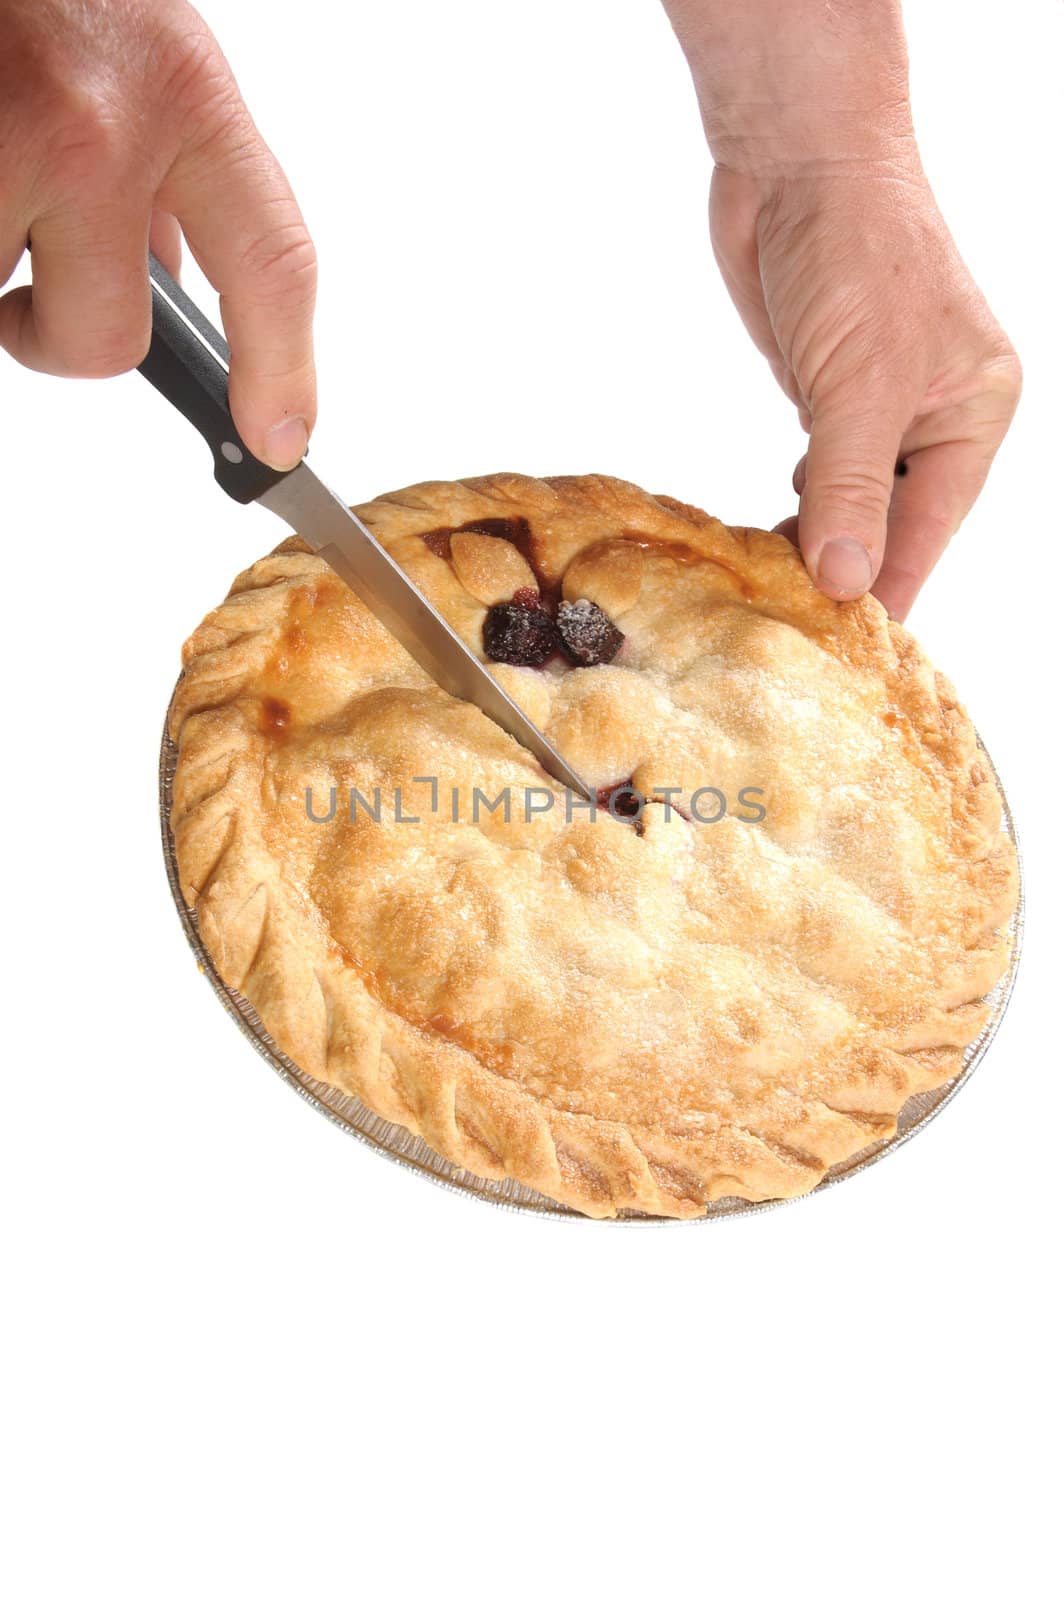 hand with knife cutting a Cherry pie, isolated on white